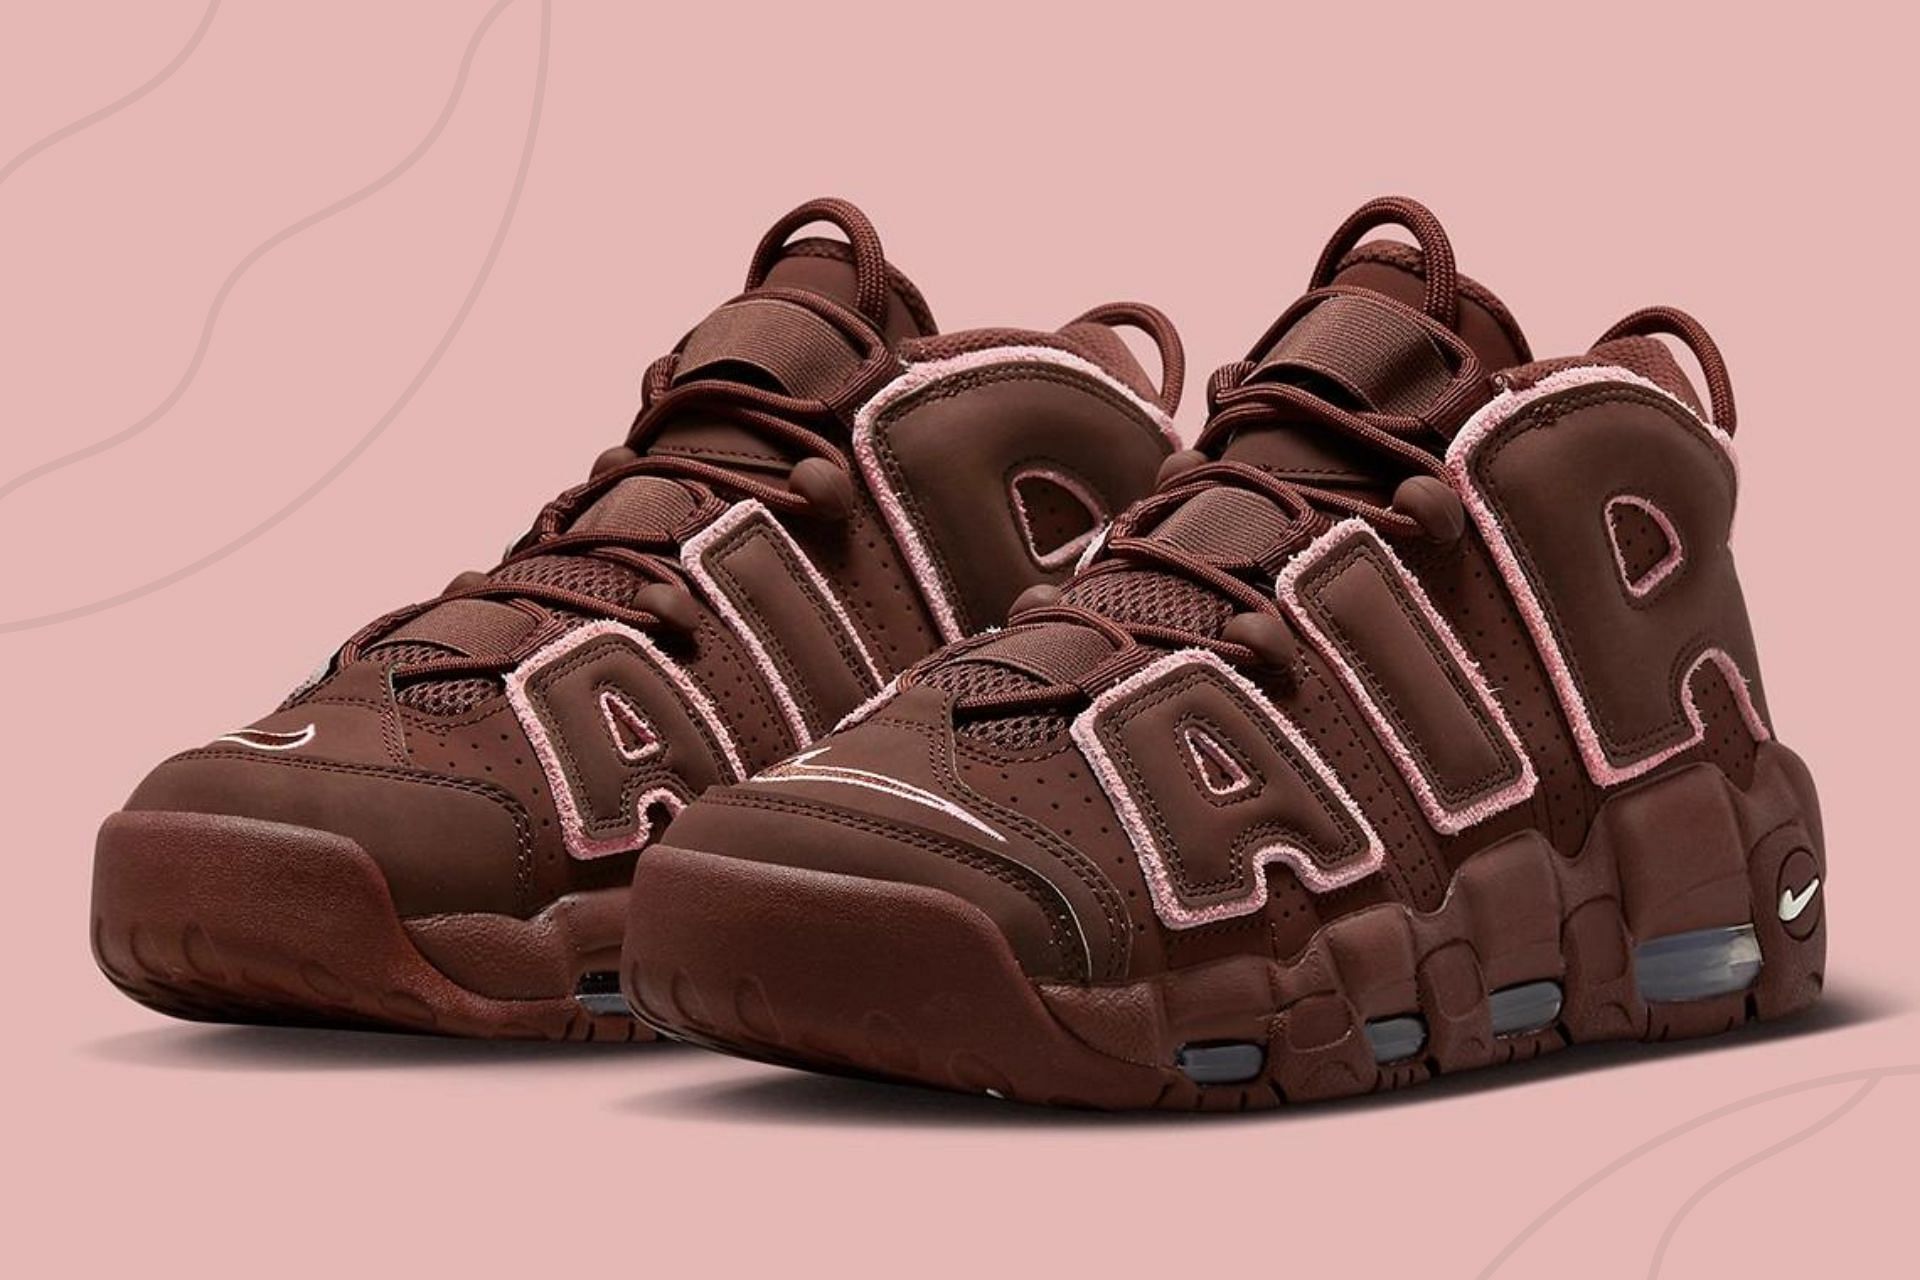 Where to buy Nike More Uptempo “Valentine's Day” edition? Price, release date, and more details explored